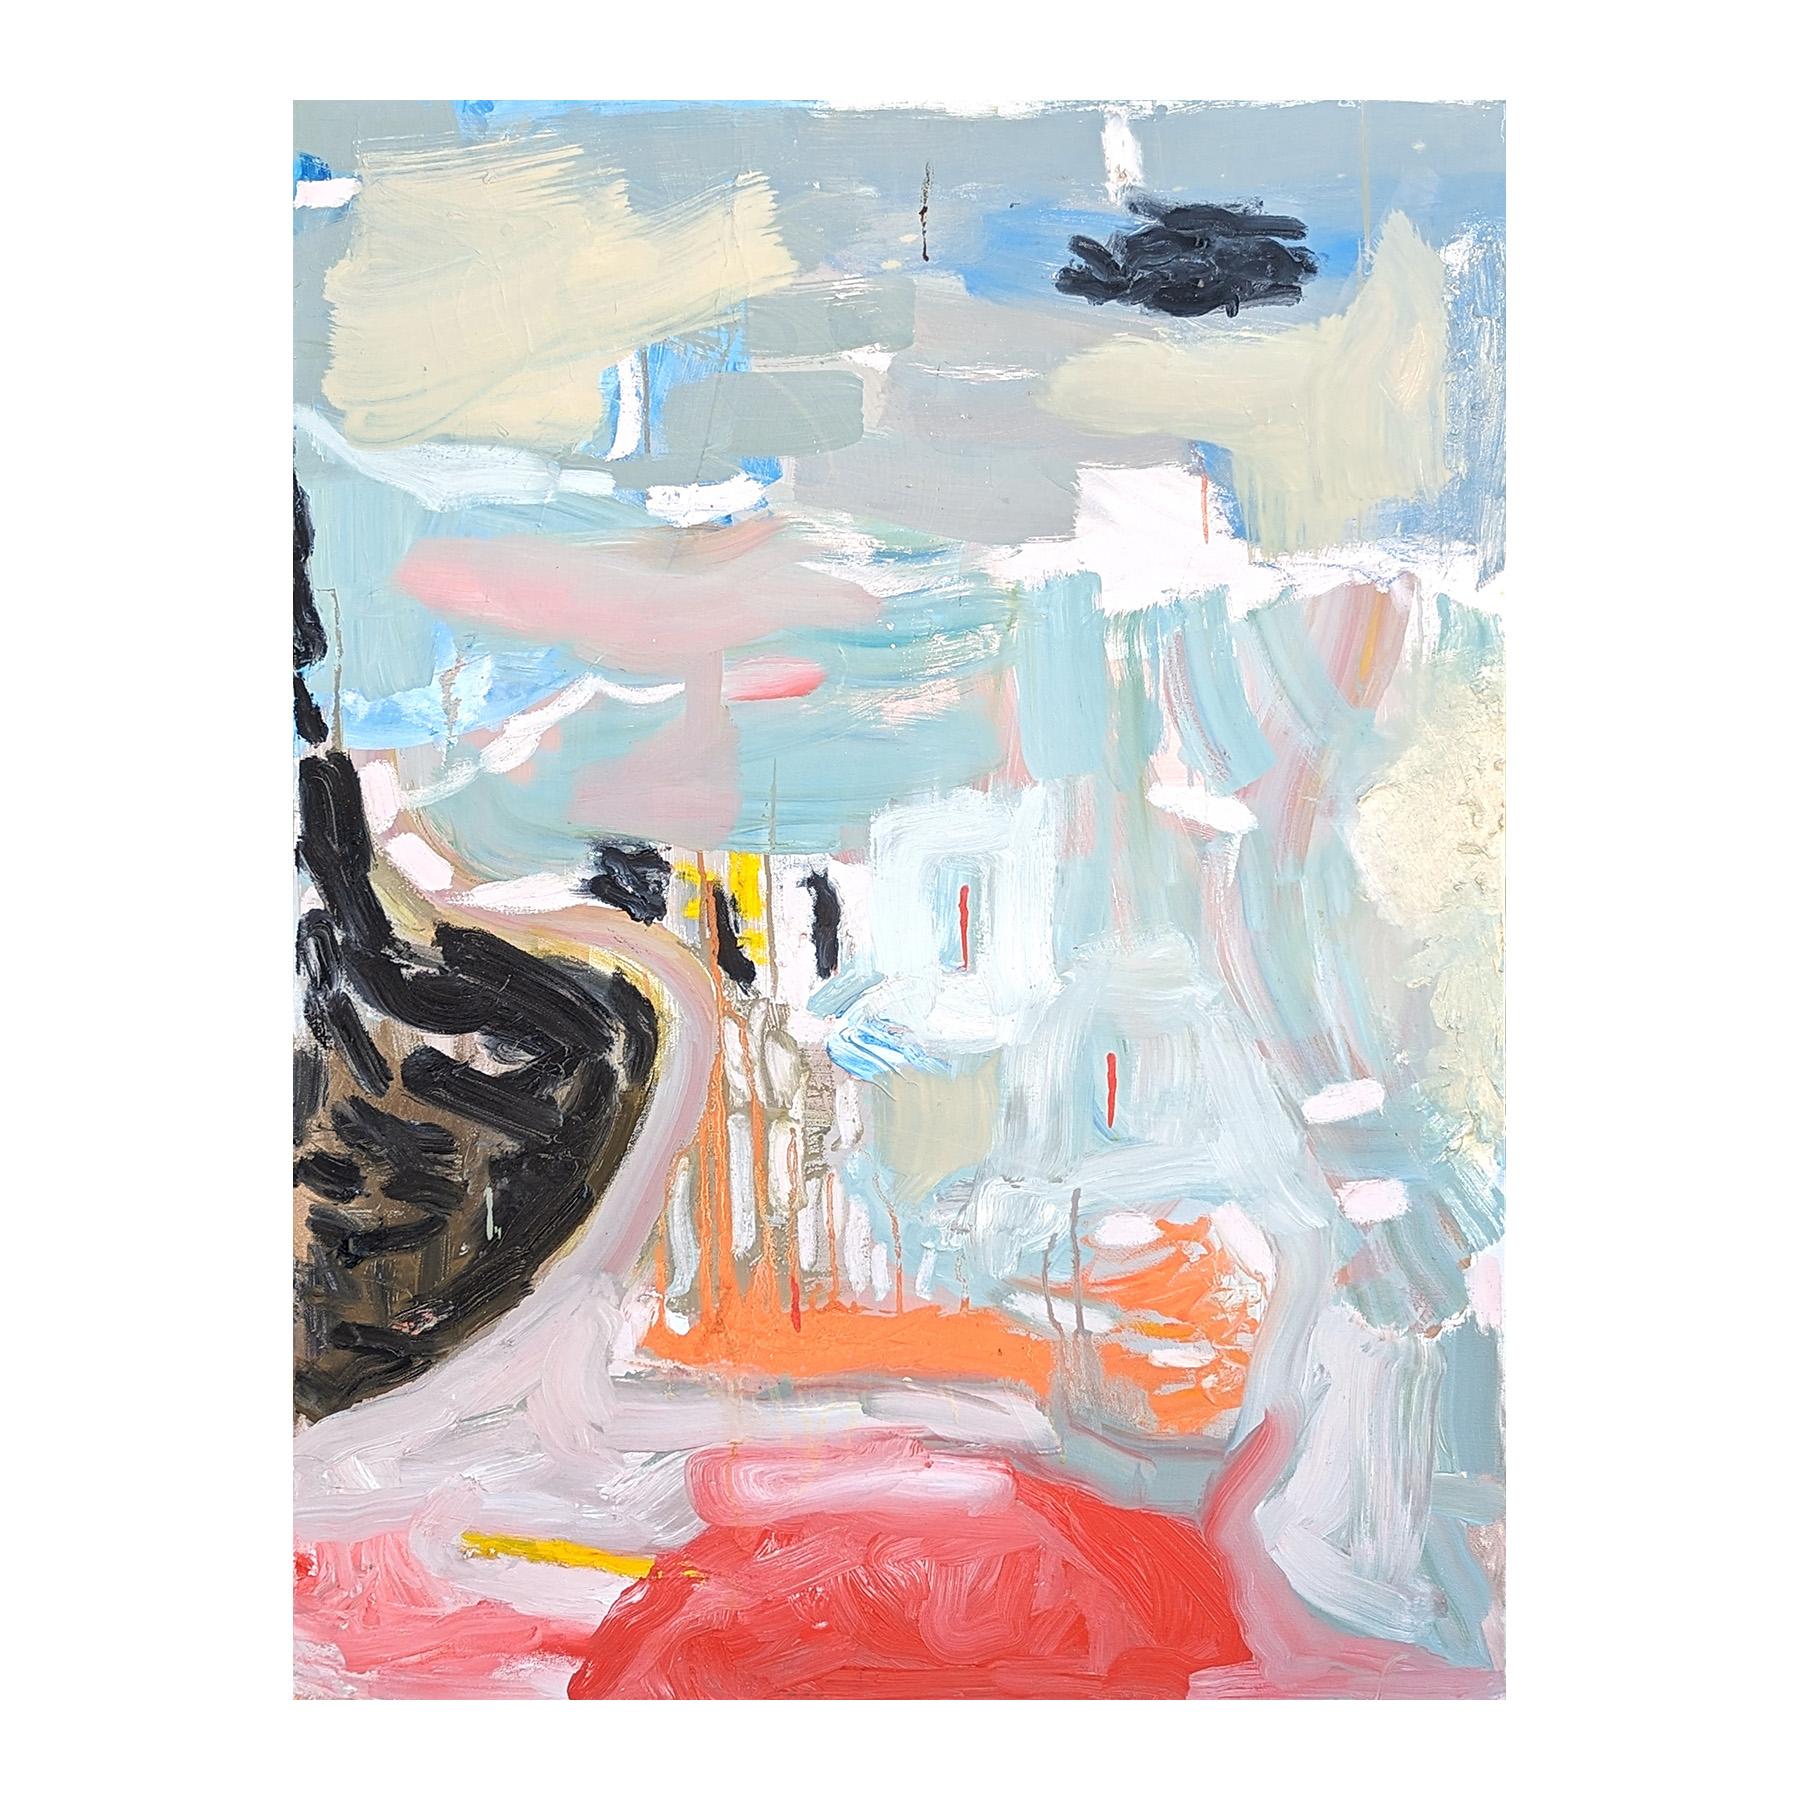 Abstract expressionist oil painting by contemporary Houston artist Benji Stiles. The work features gestural marks in pastel blue, orange, red, and black set against a grey background. Currently unframed, but options are available.

Artist Biography: